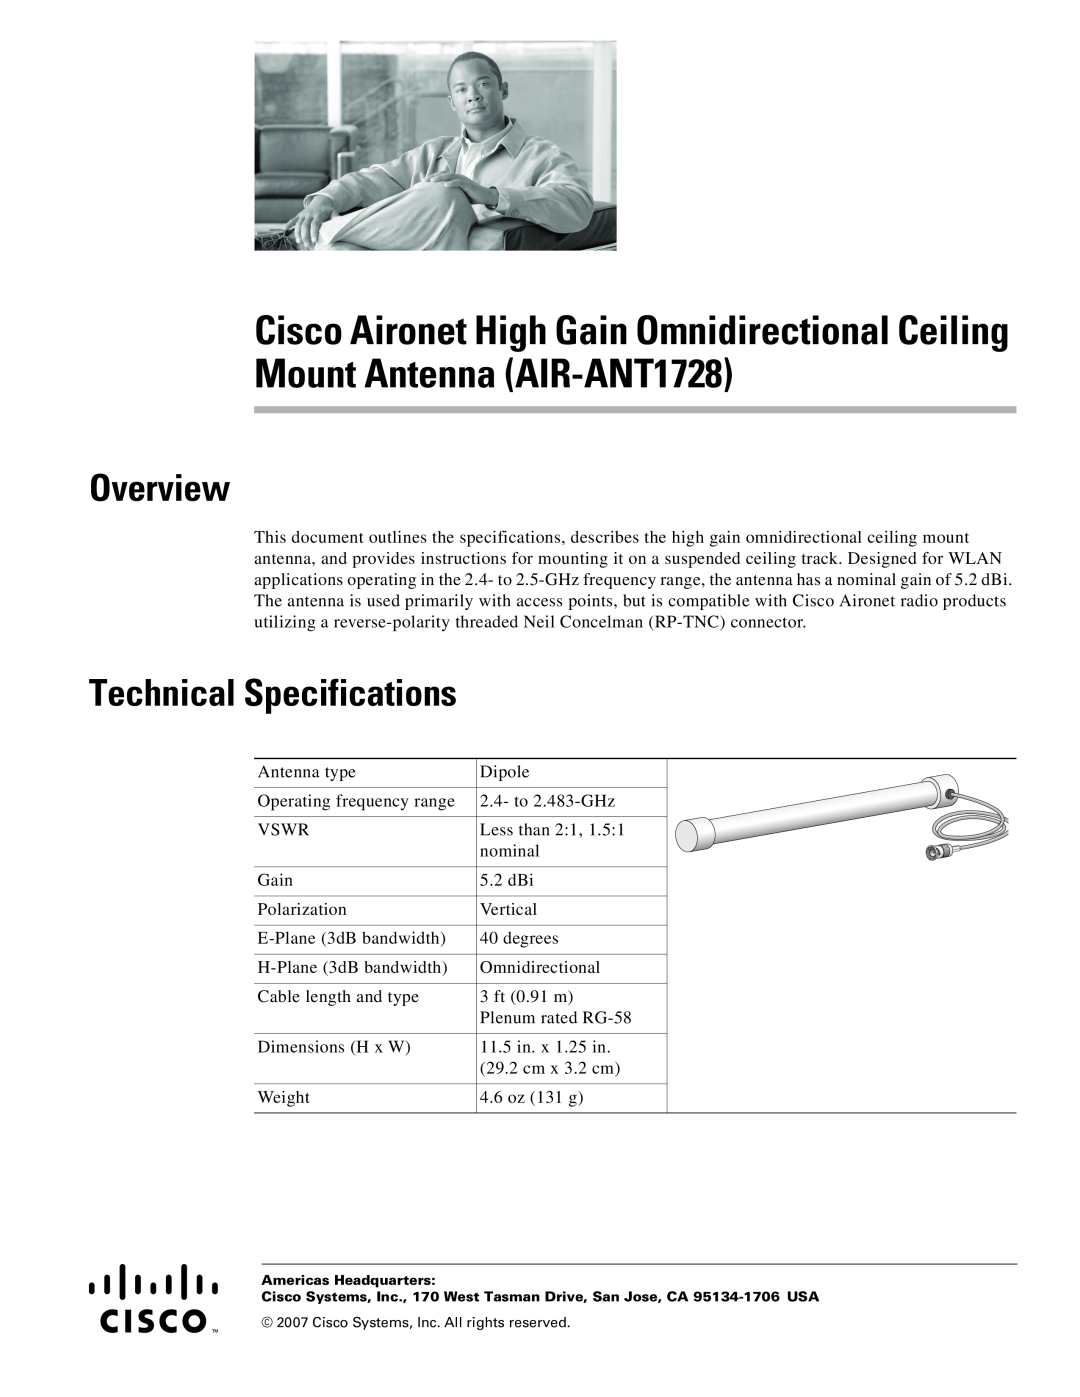 Cisco Systems AIR-ANT1728 technical specifications Overview, Technical Specifications 